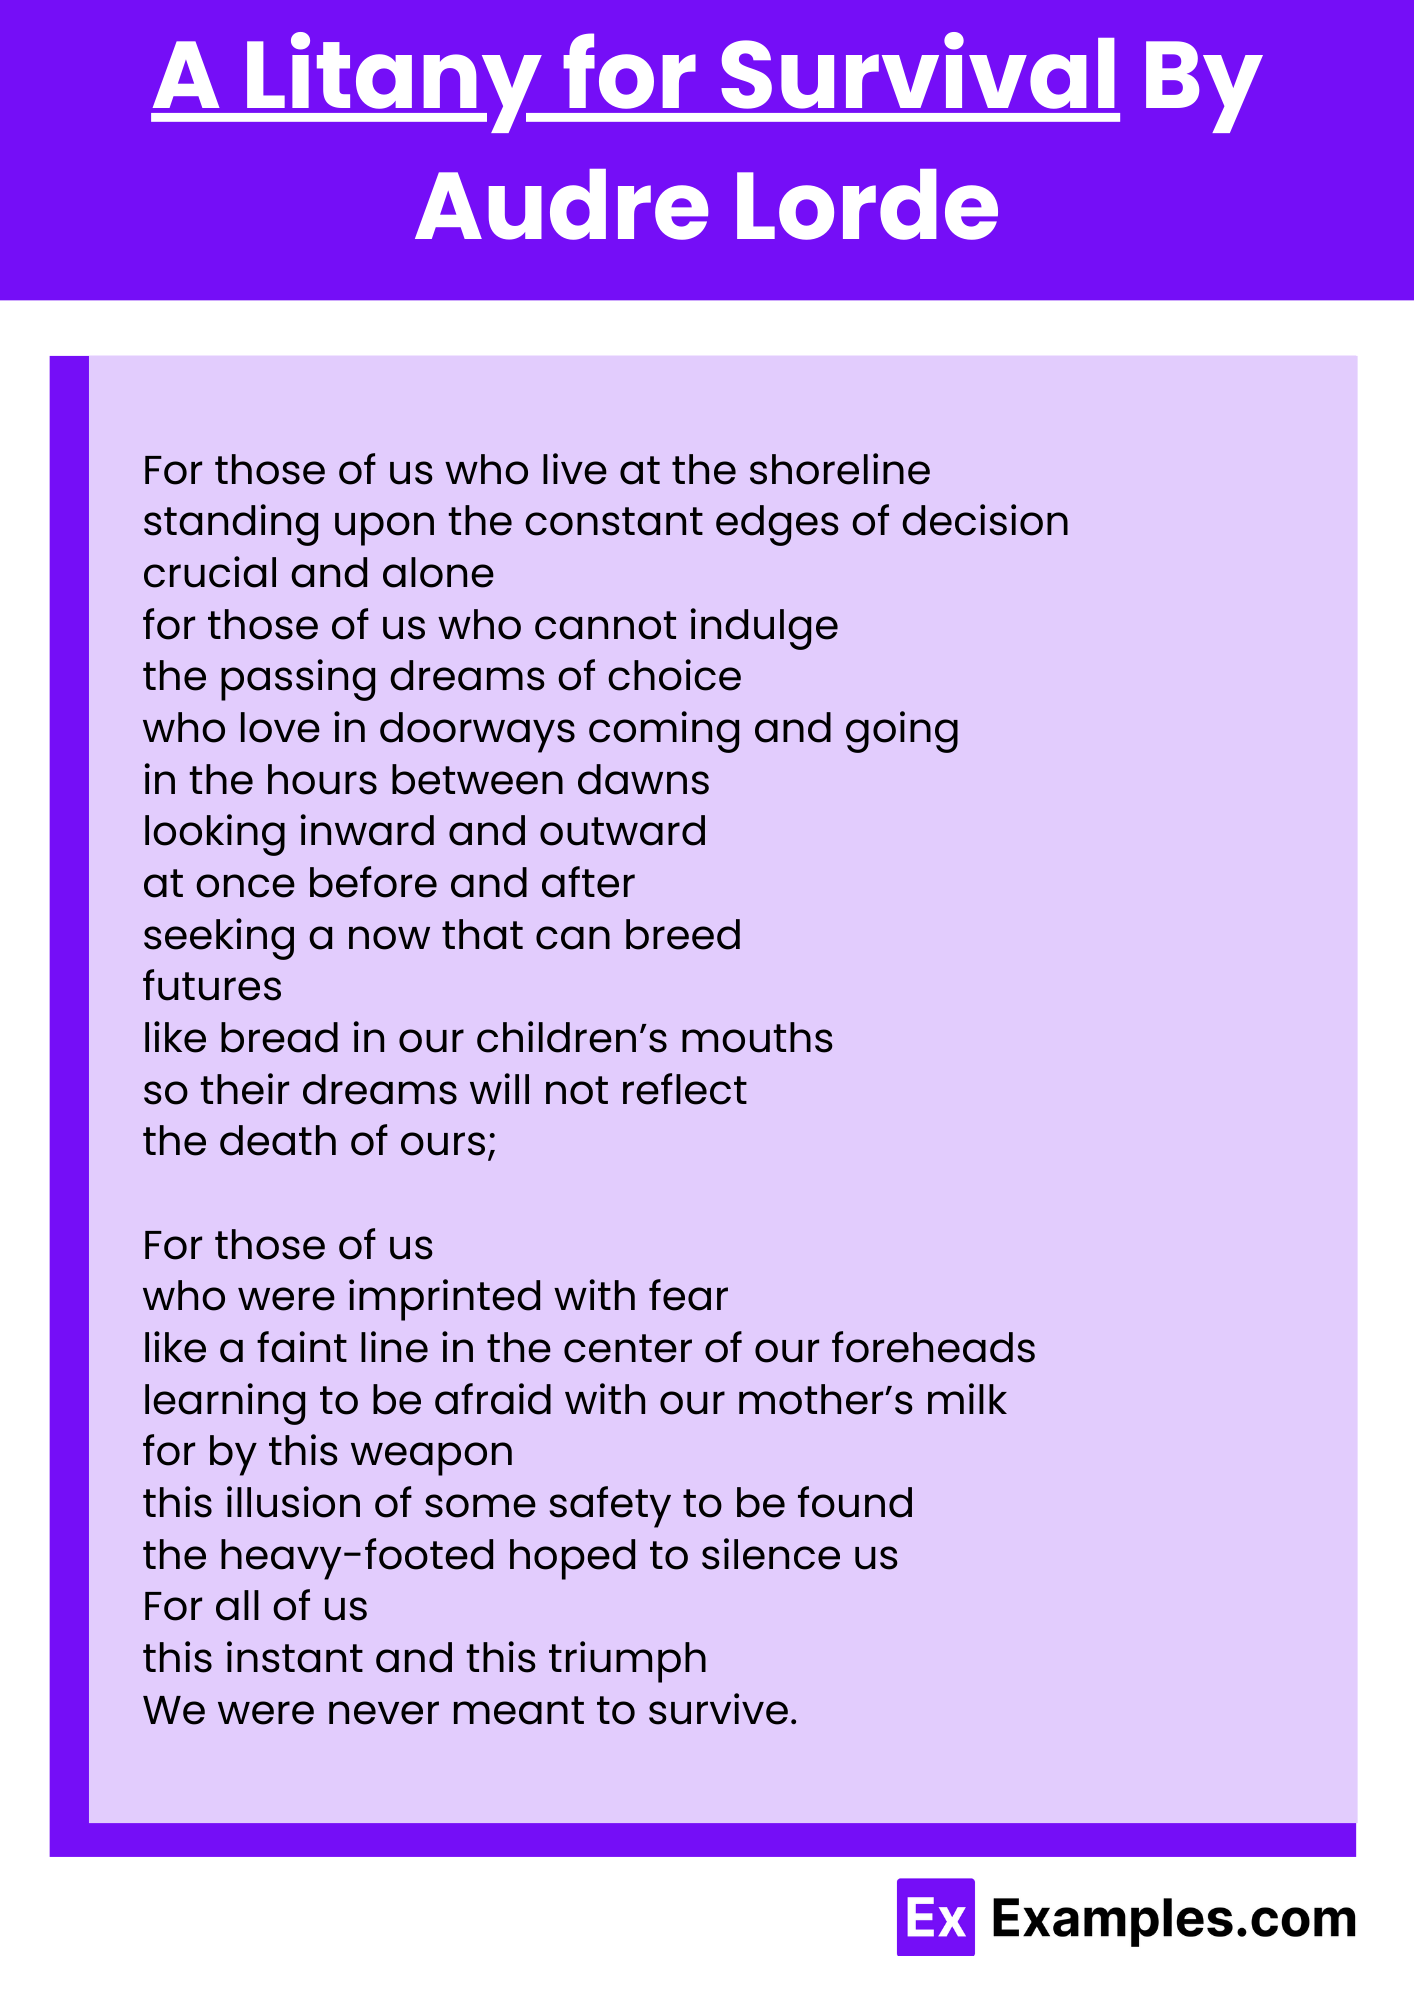 A Litany for Survival By Audre Lorde